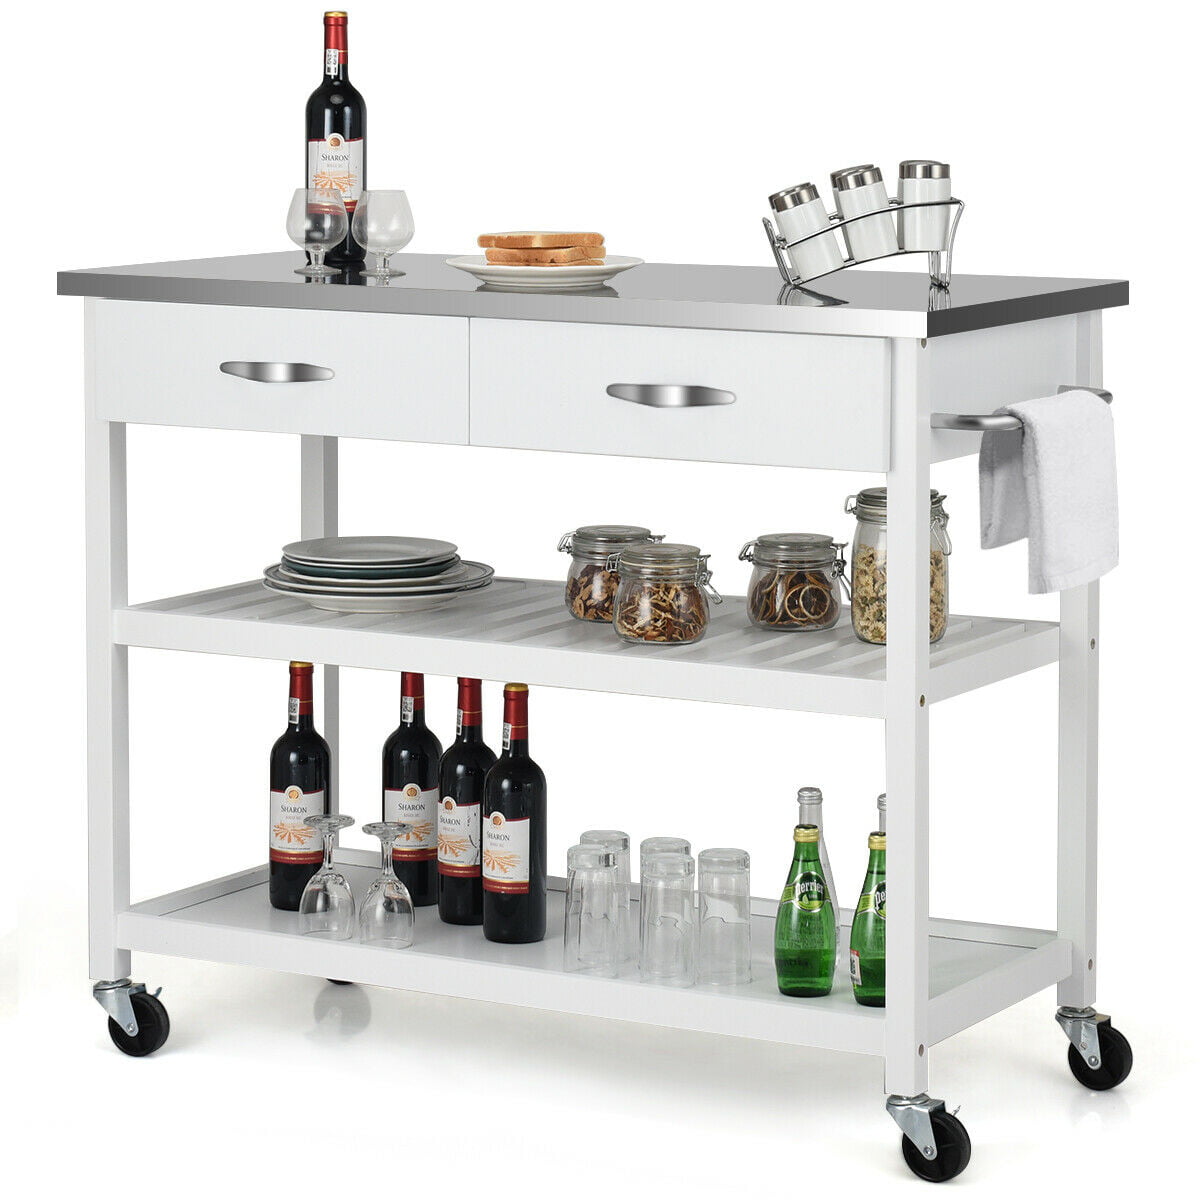 Stainless Steel Rolling Kitchen Trolley Cart IslandCountertop w/ Drawer Stainless Steel Rolling Kitchen Cart